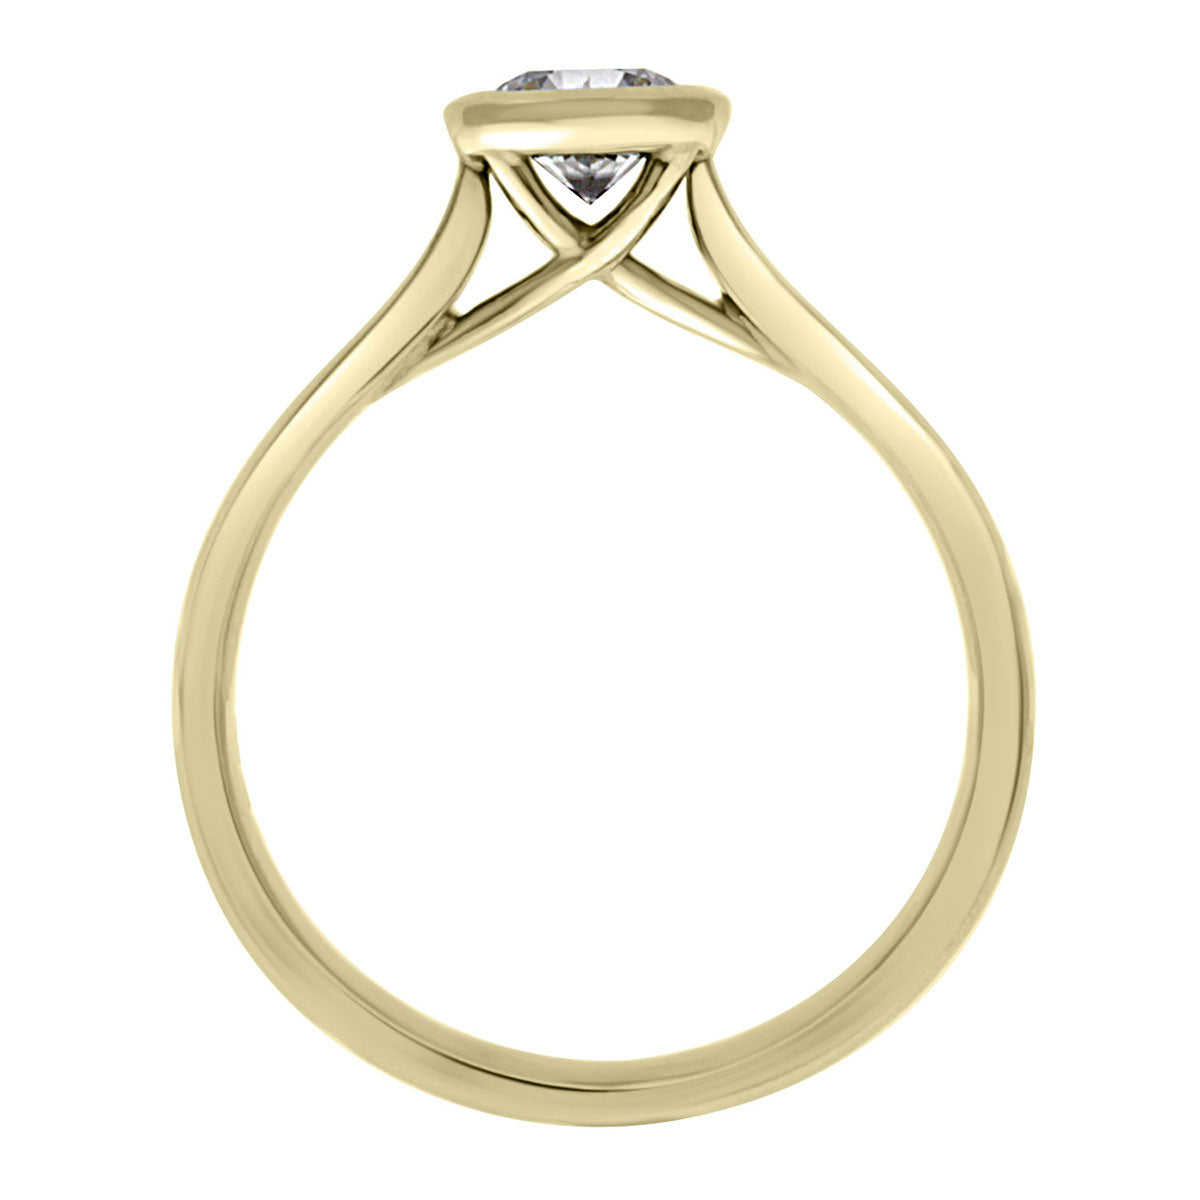 Bezel Set Engagement ring in 18kt yellow gold  in upright position